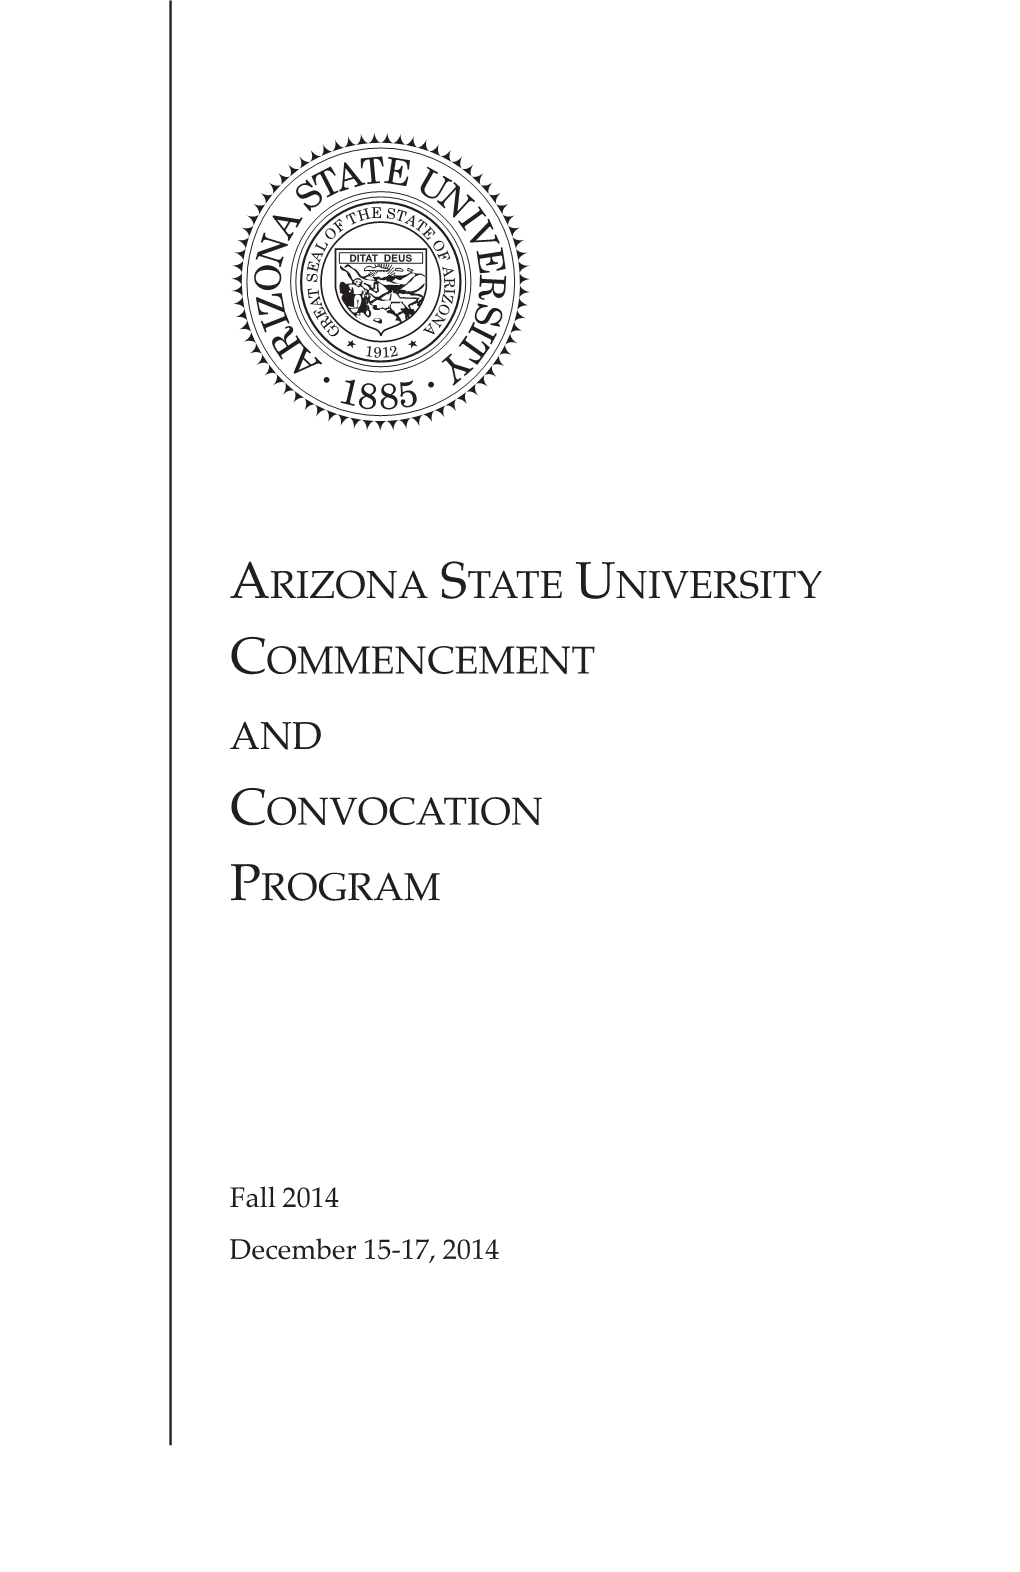 Arizona State University Commencement and Convocation Program